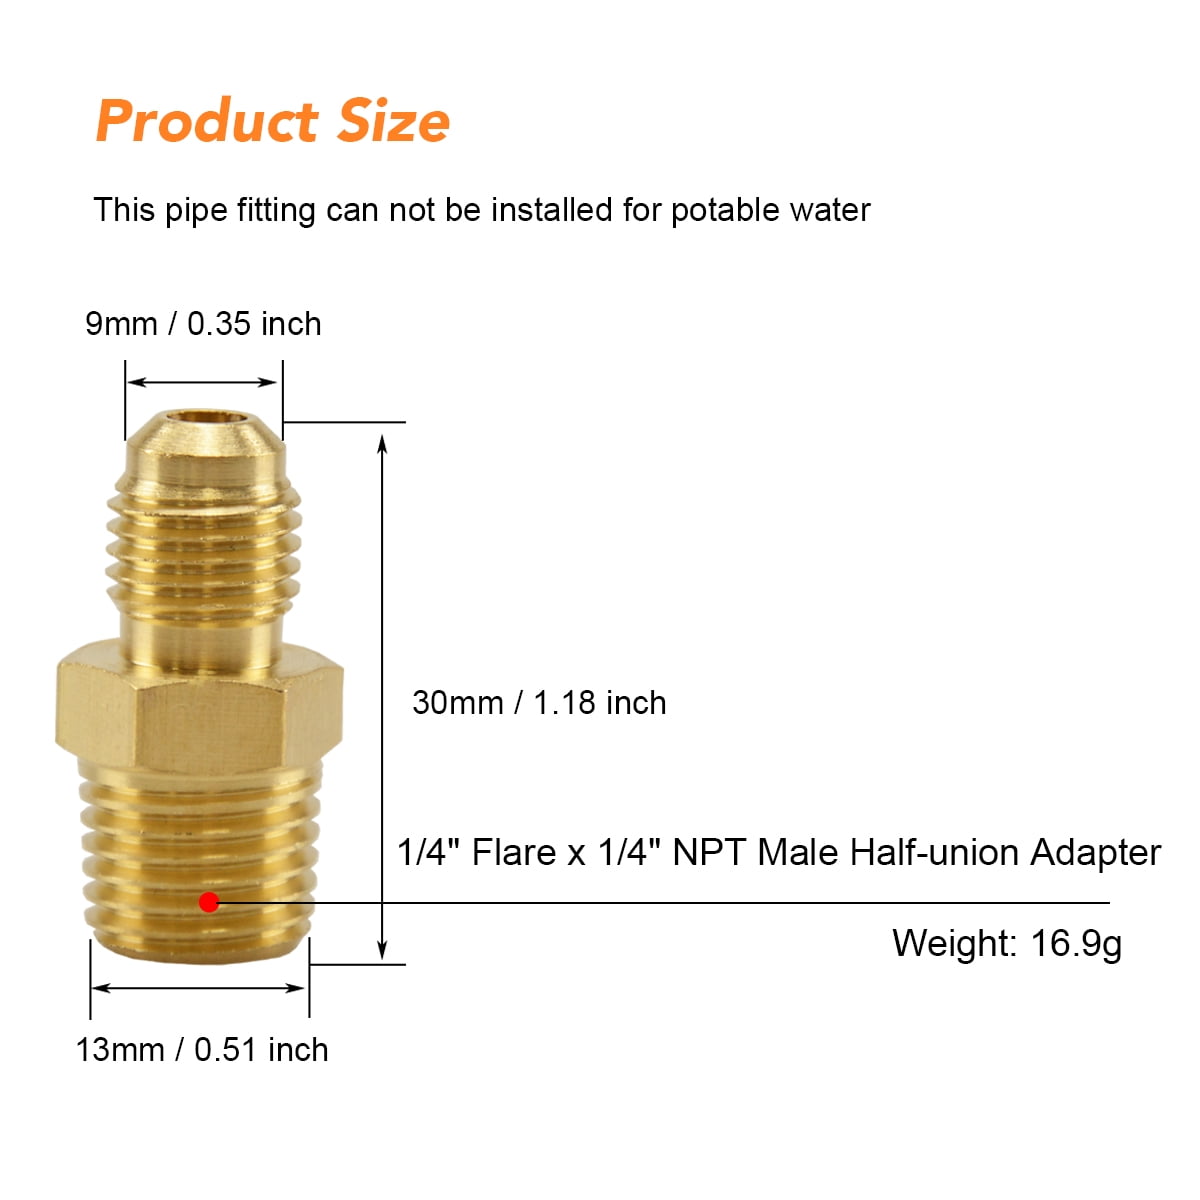 6 Pack) Brass Half Union Coupler Adapter, 1/4 Flare x 1/4 NPT Male Hex  Nipple, Pipe Fitting Gas Adapter 